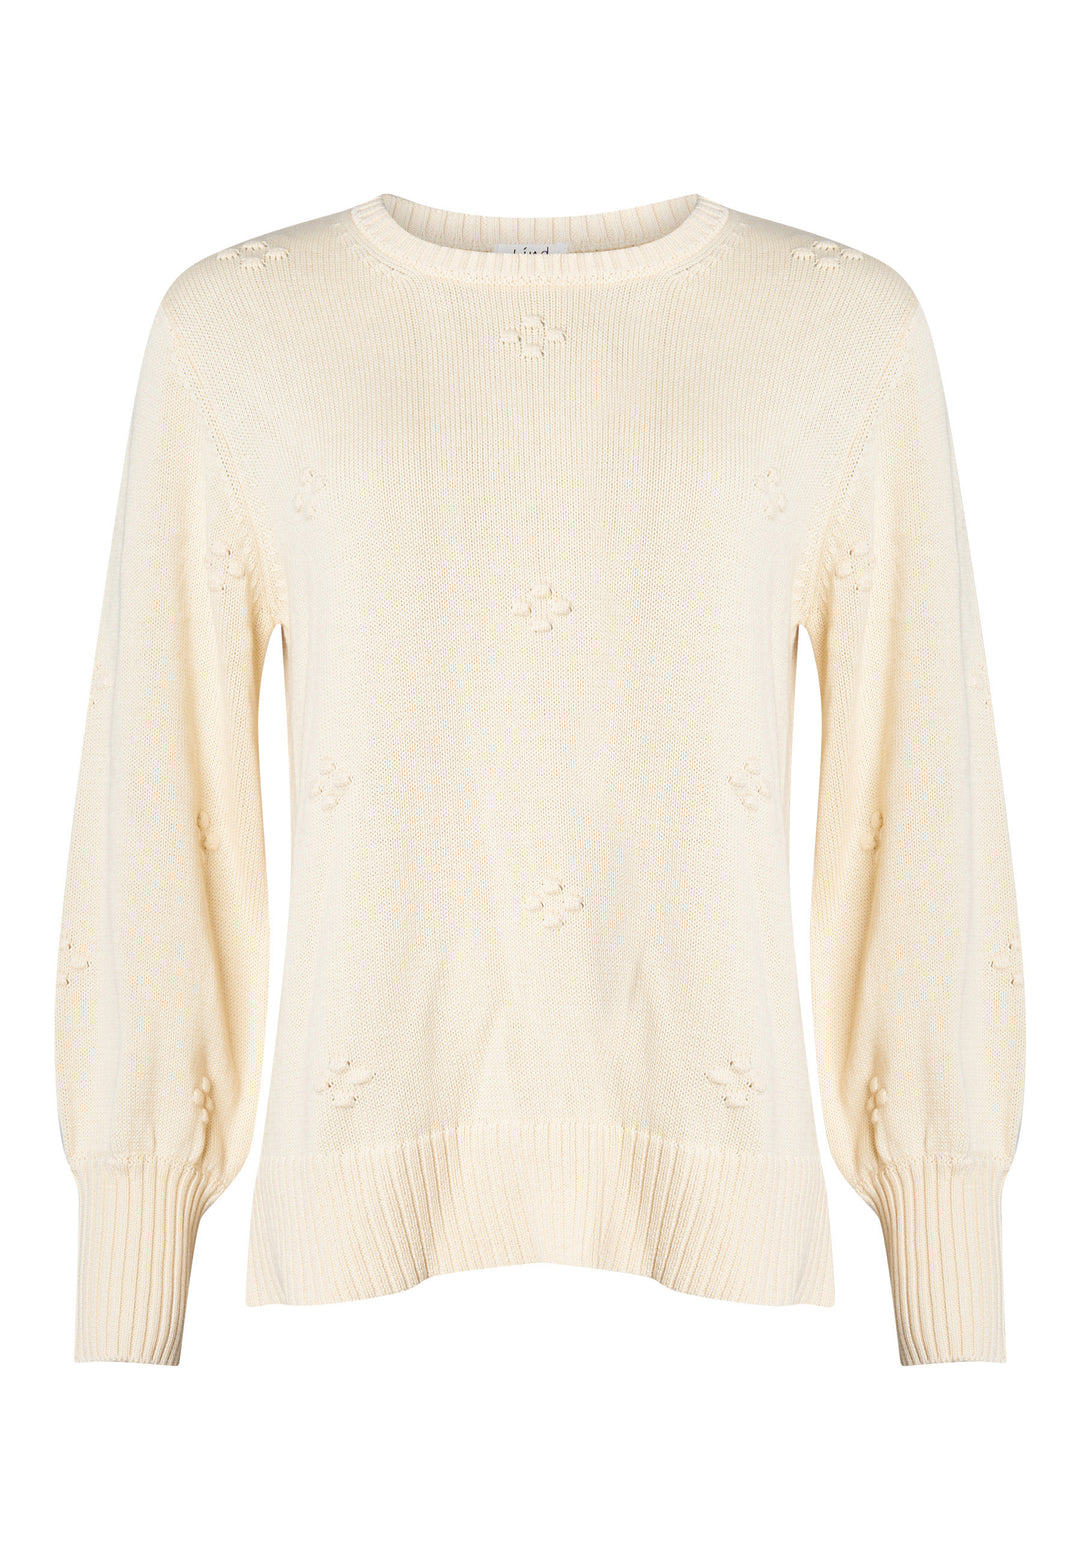 Lind LICamma Knit Pullover 1001 Off white